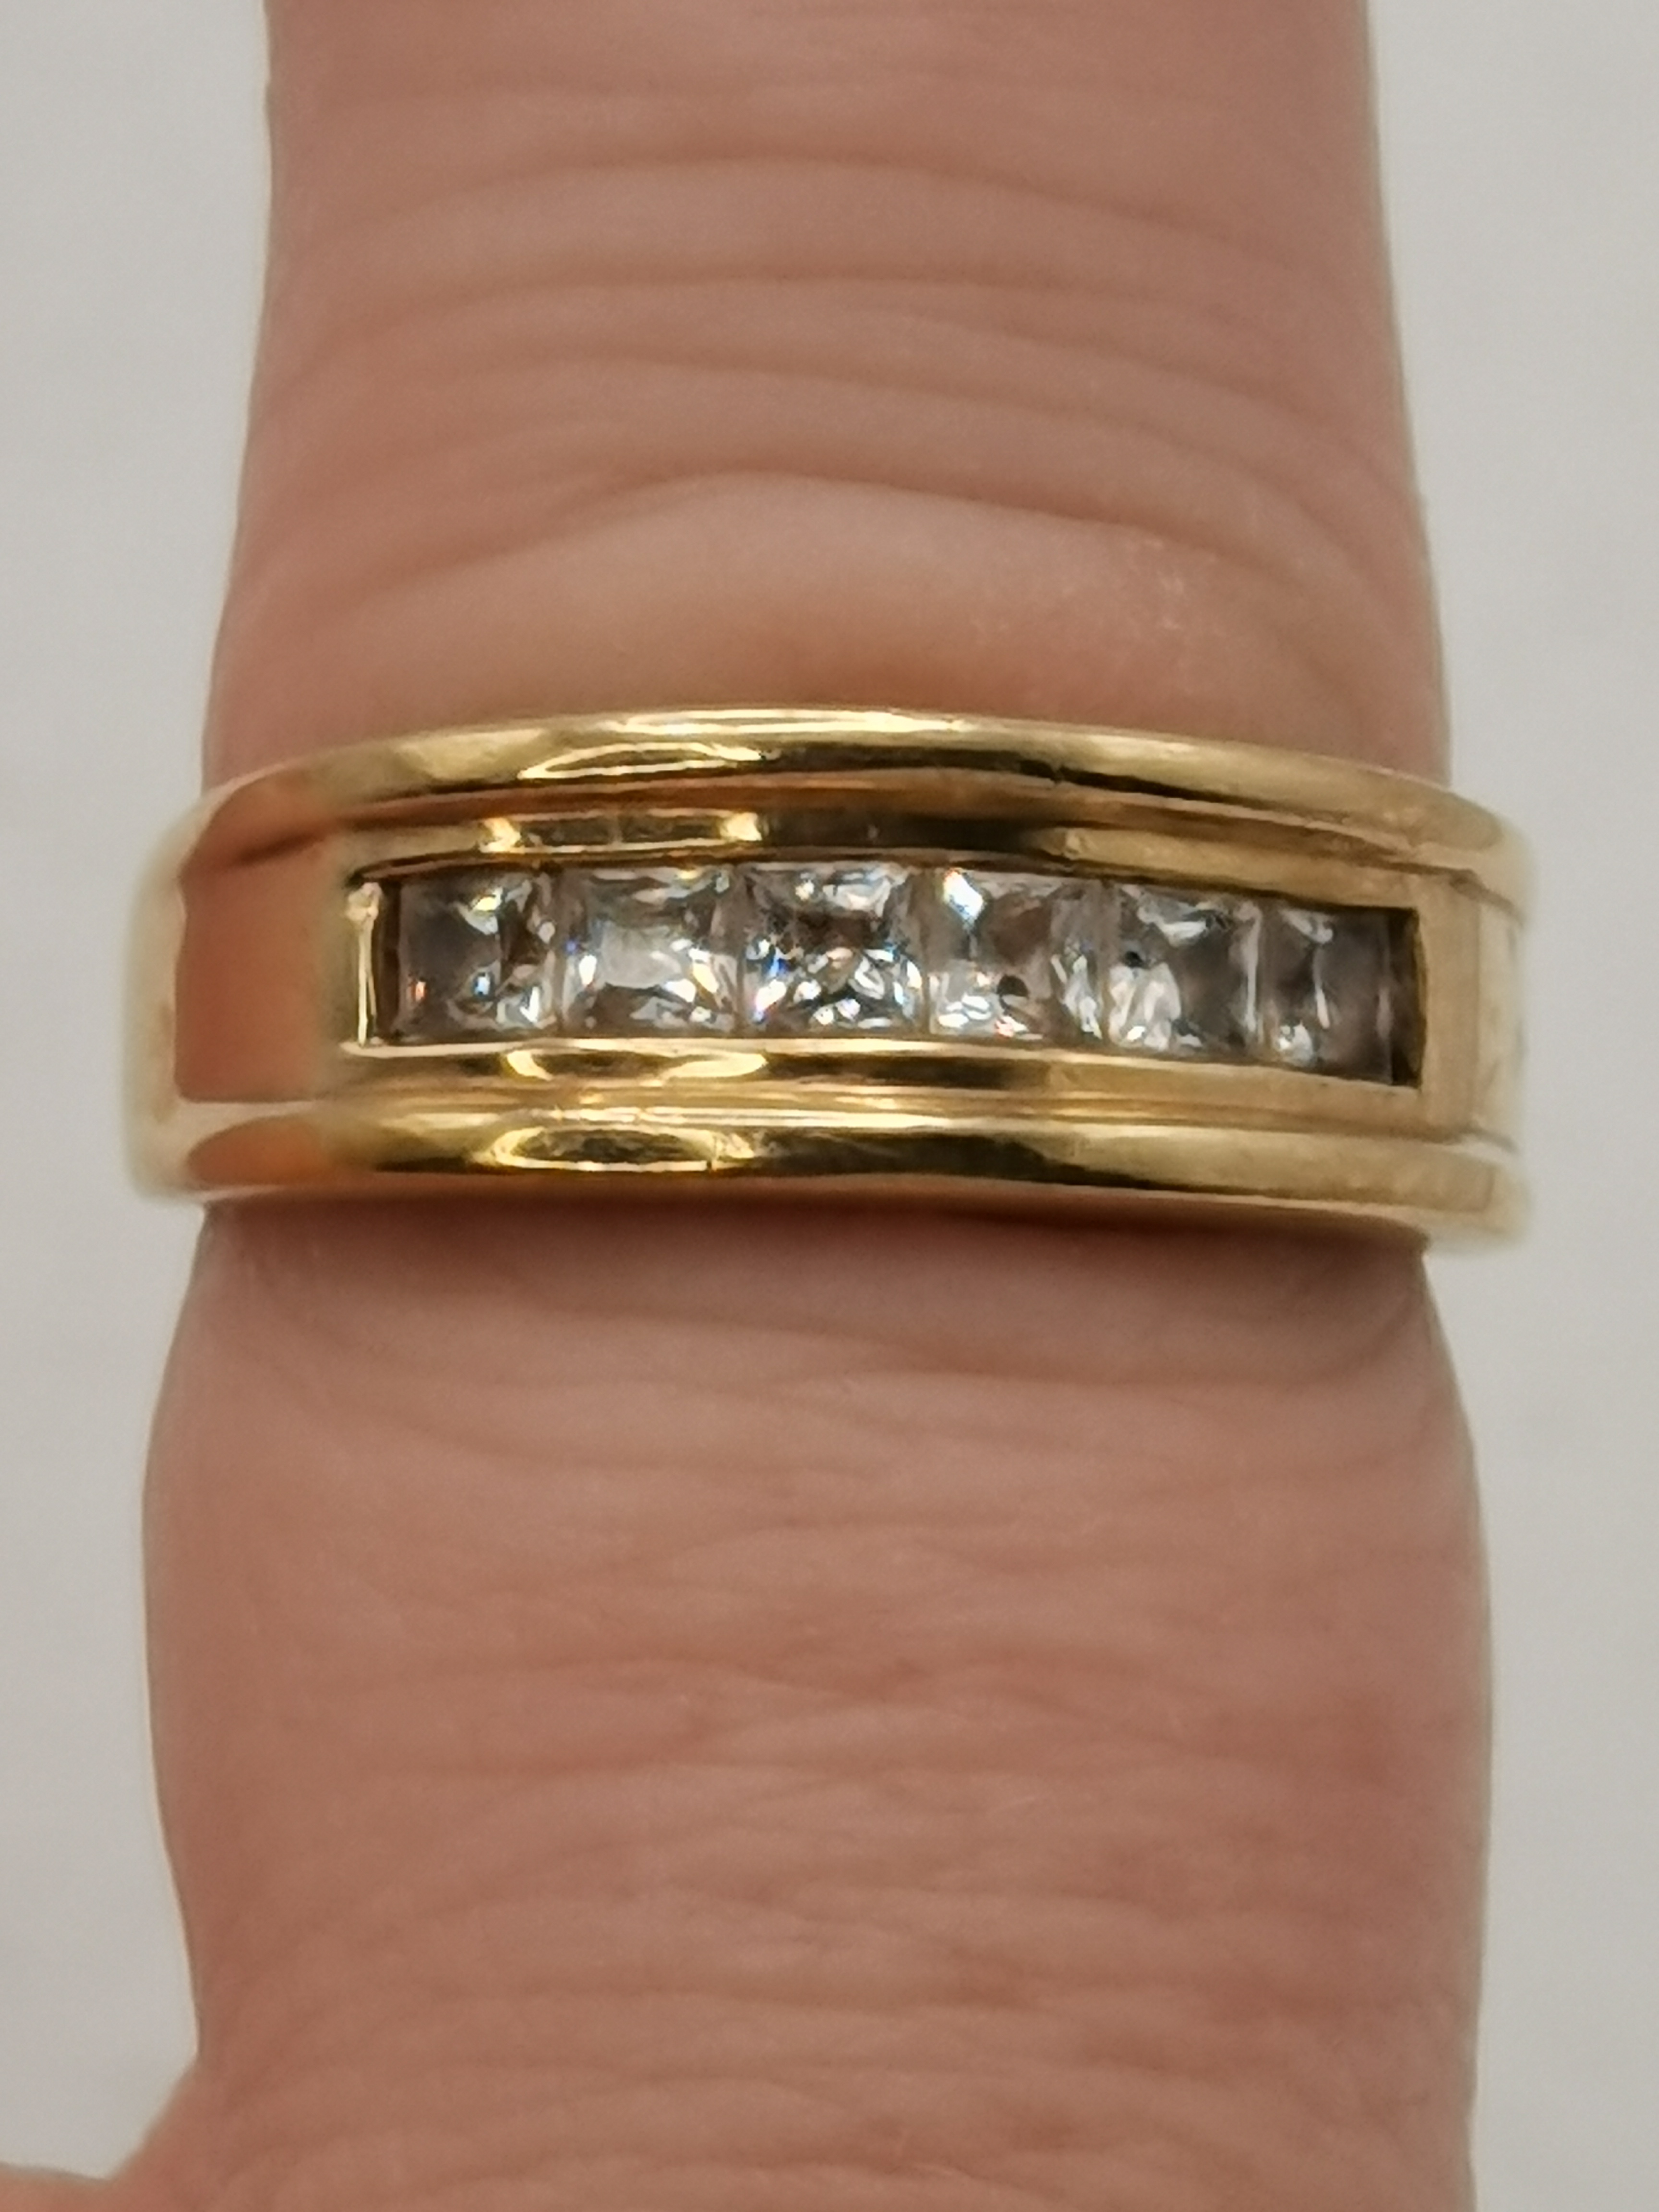 Two 9 carat gold rings - Image 4 of 6